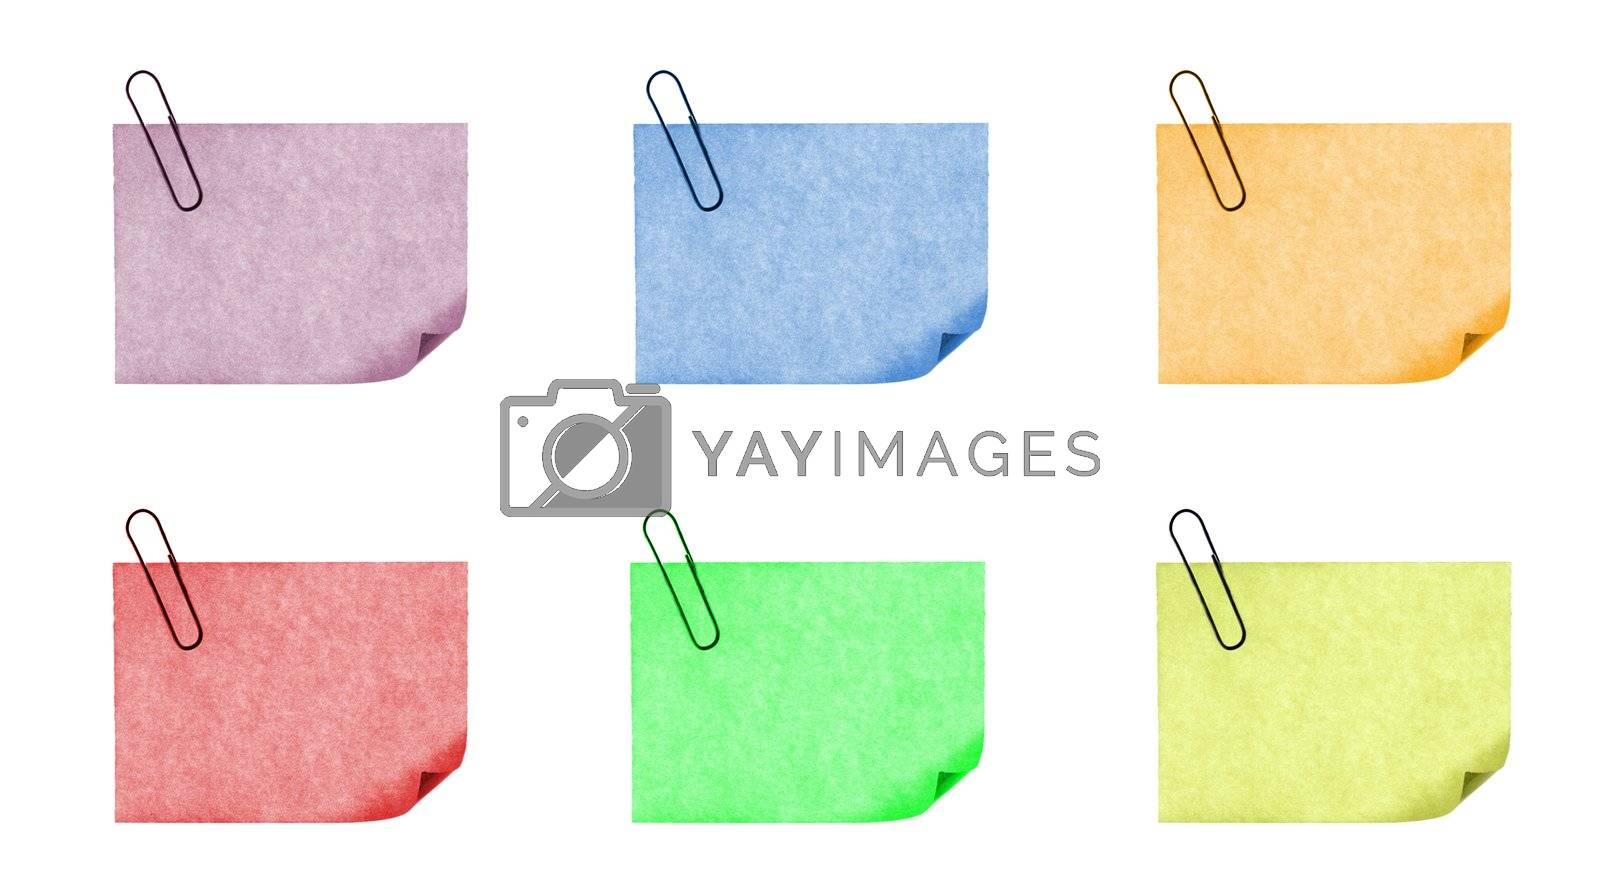 Royalty free image of isolated blank postit paper on withe background by Trebuchet